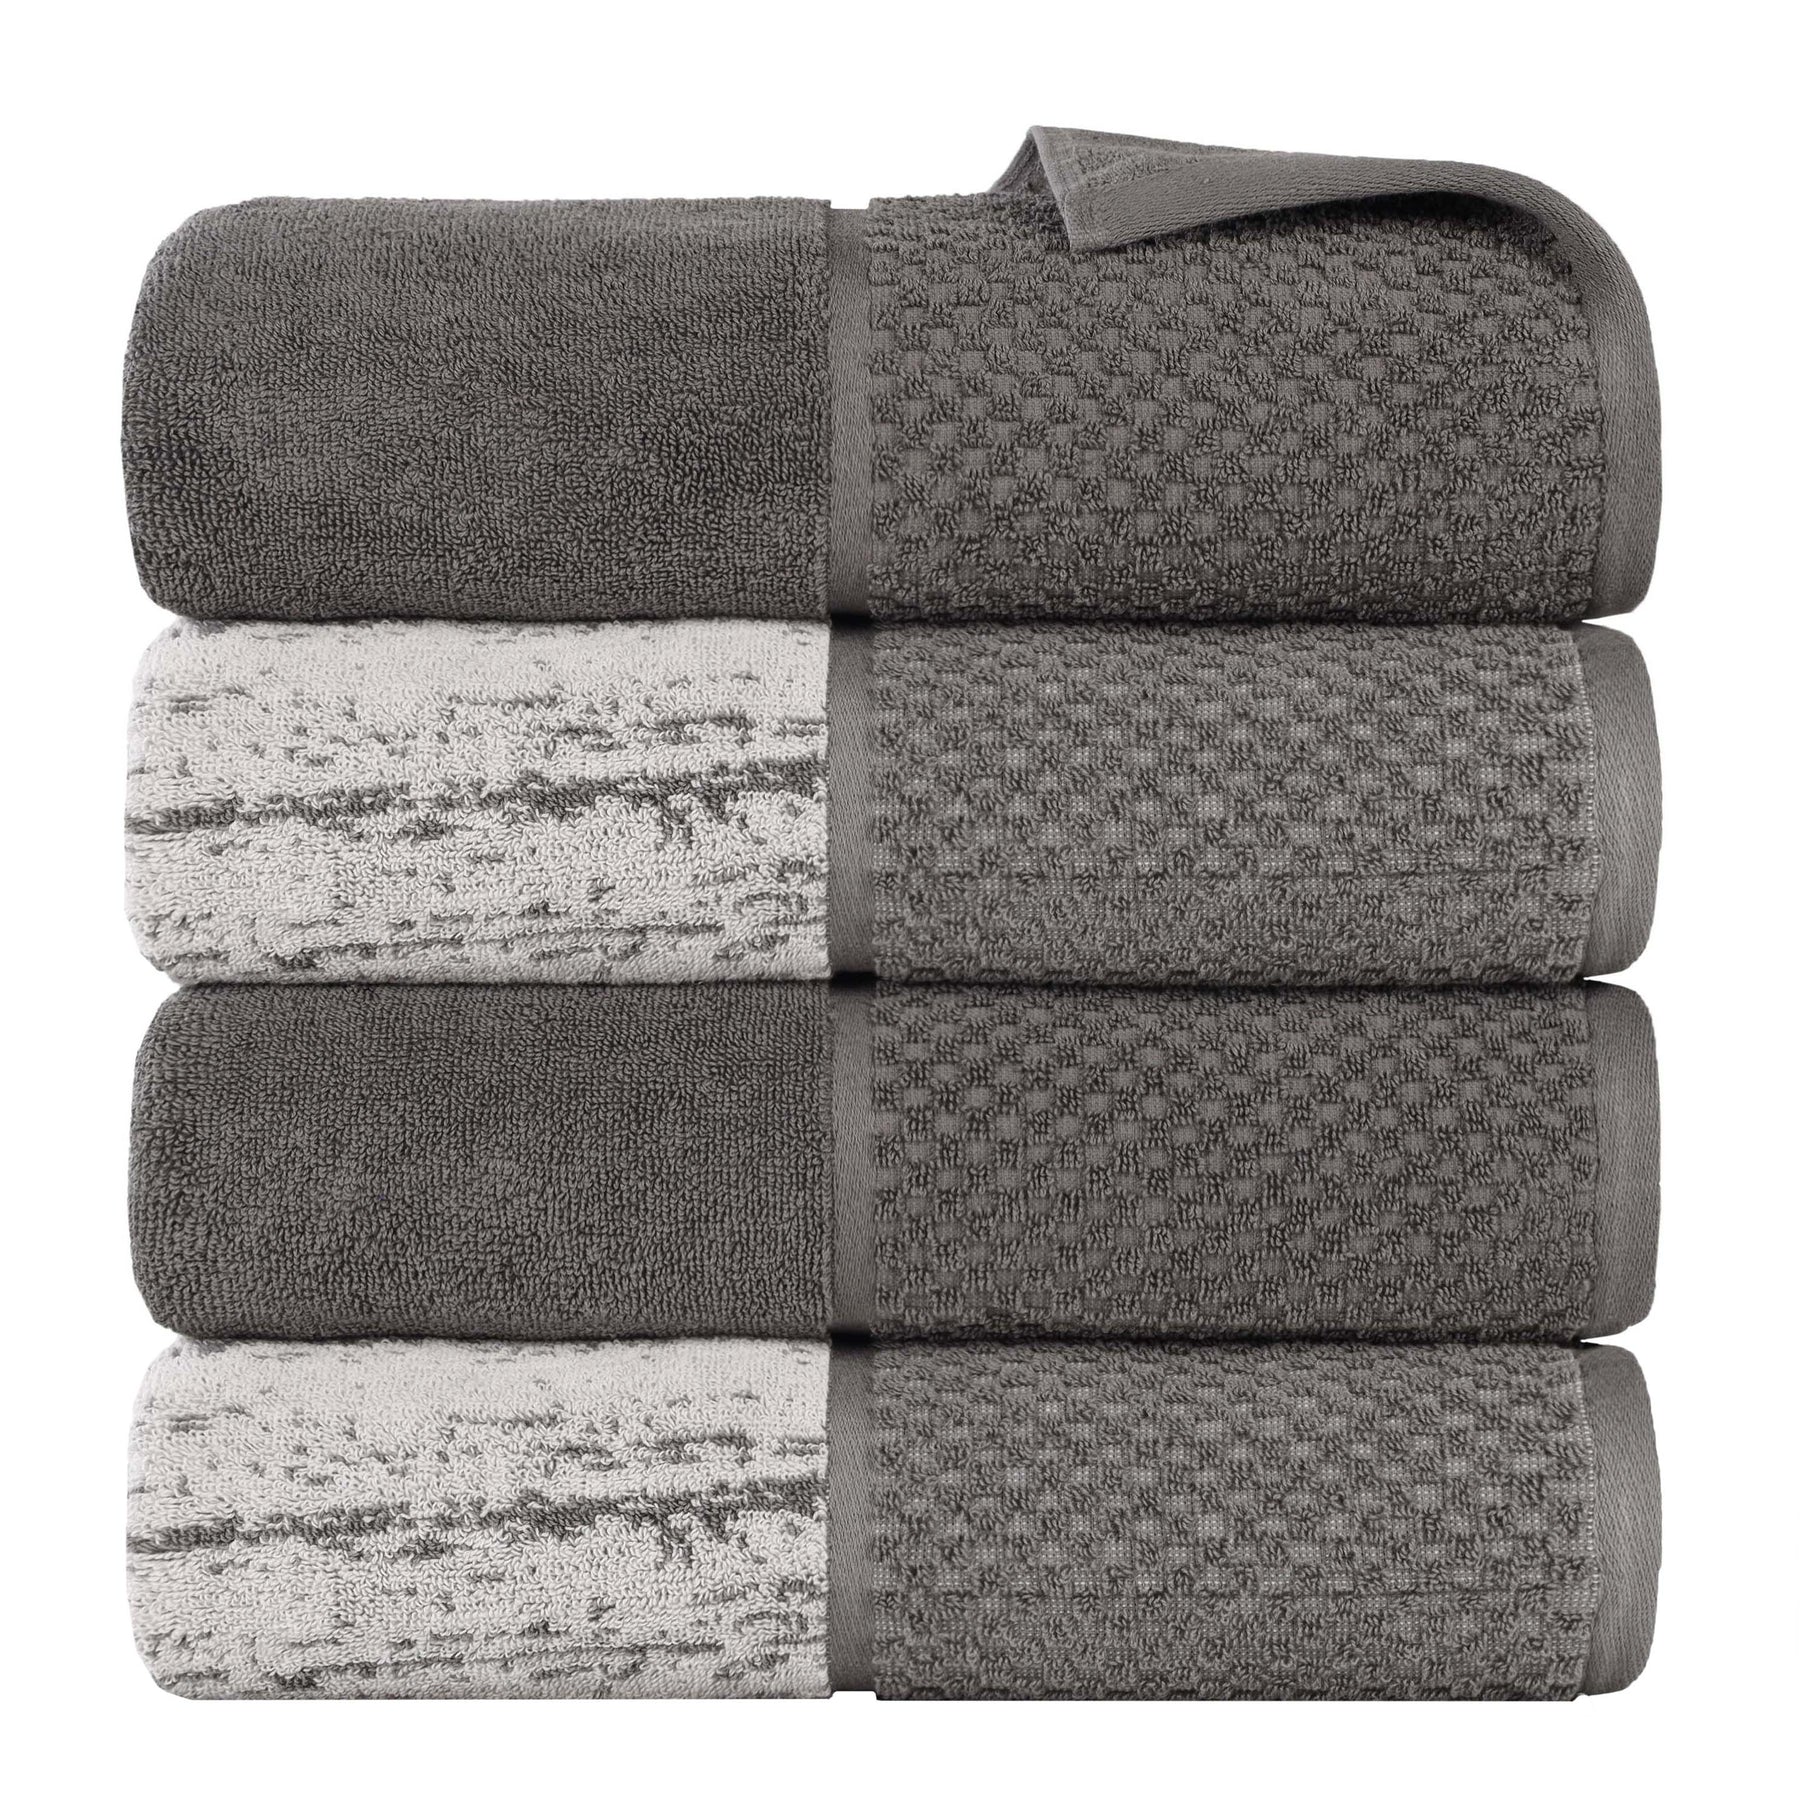 Lodie Cotton Jacquard Solid and Two-Toned Bath Towel Set of 4